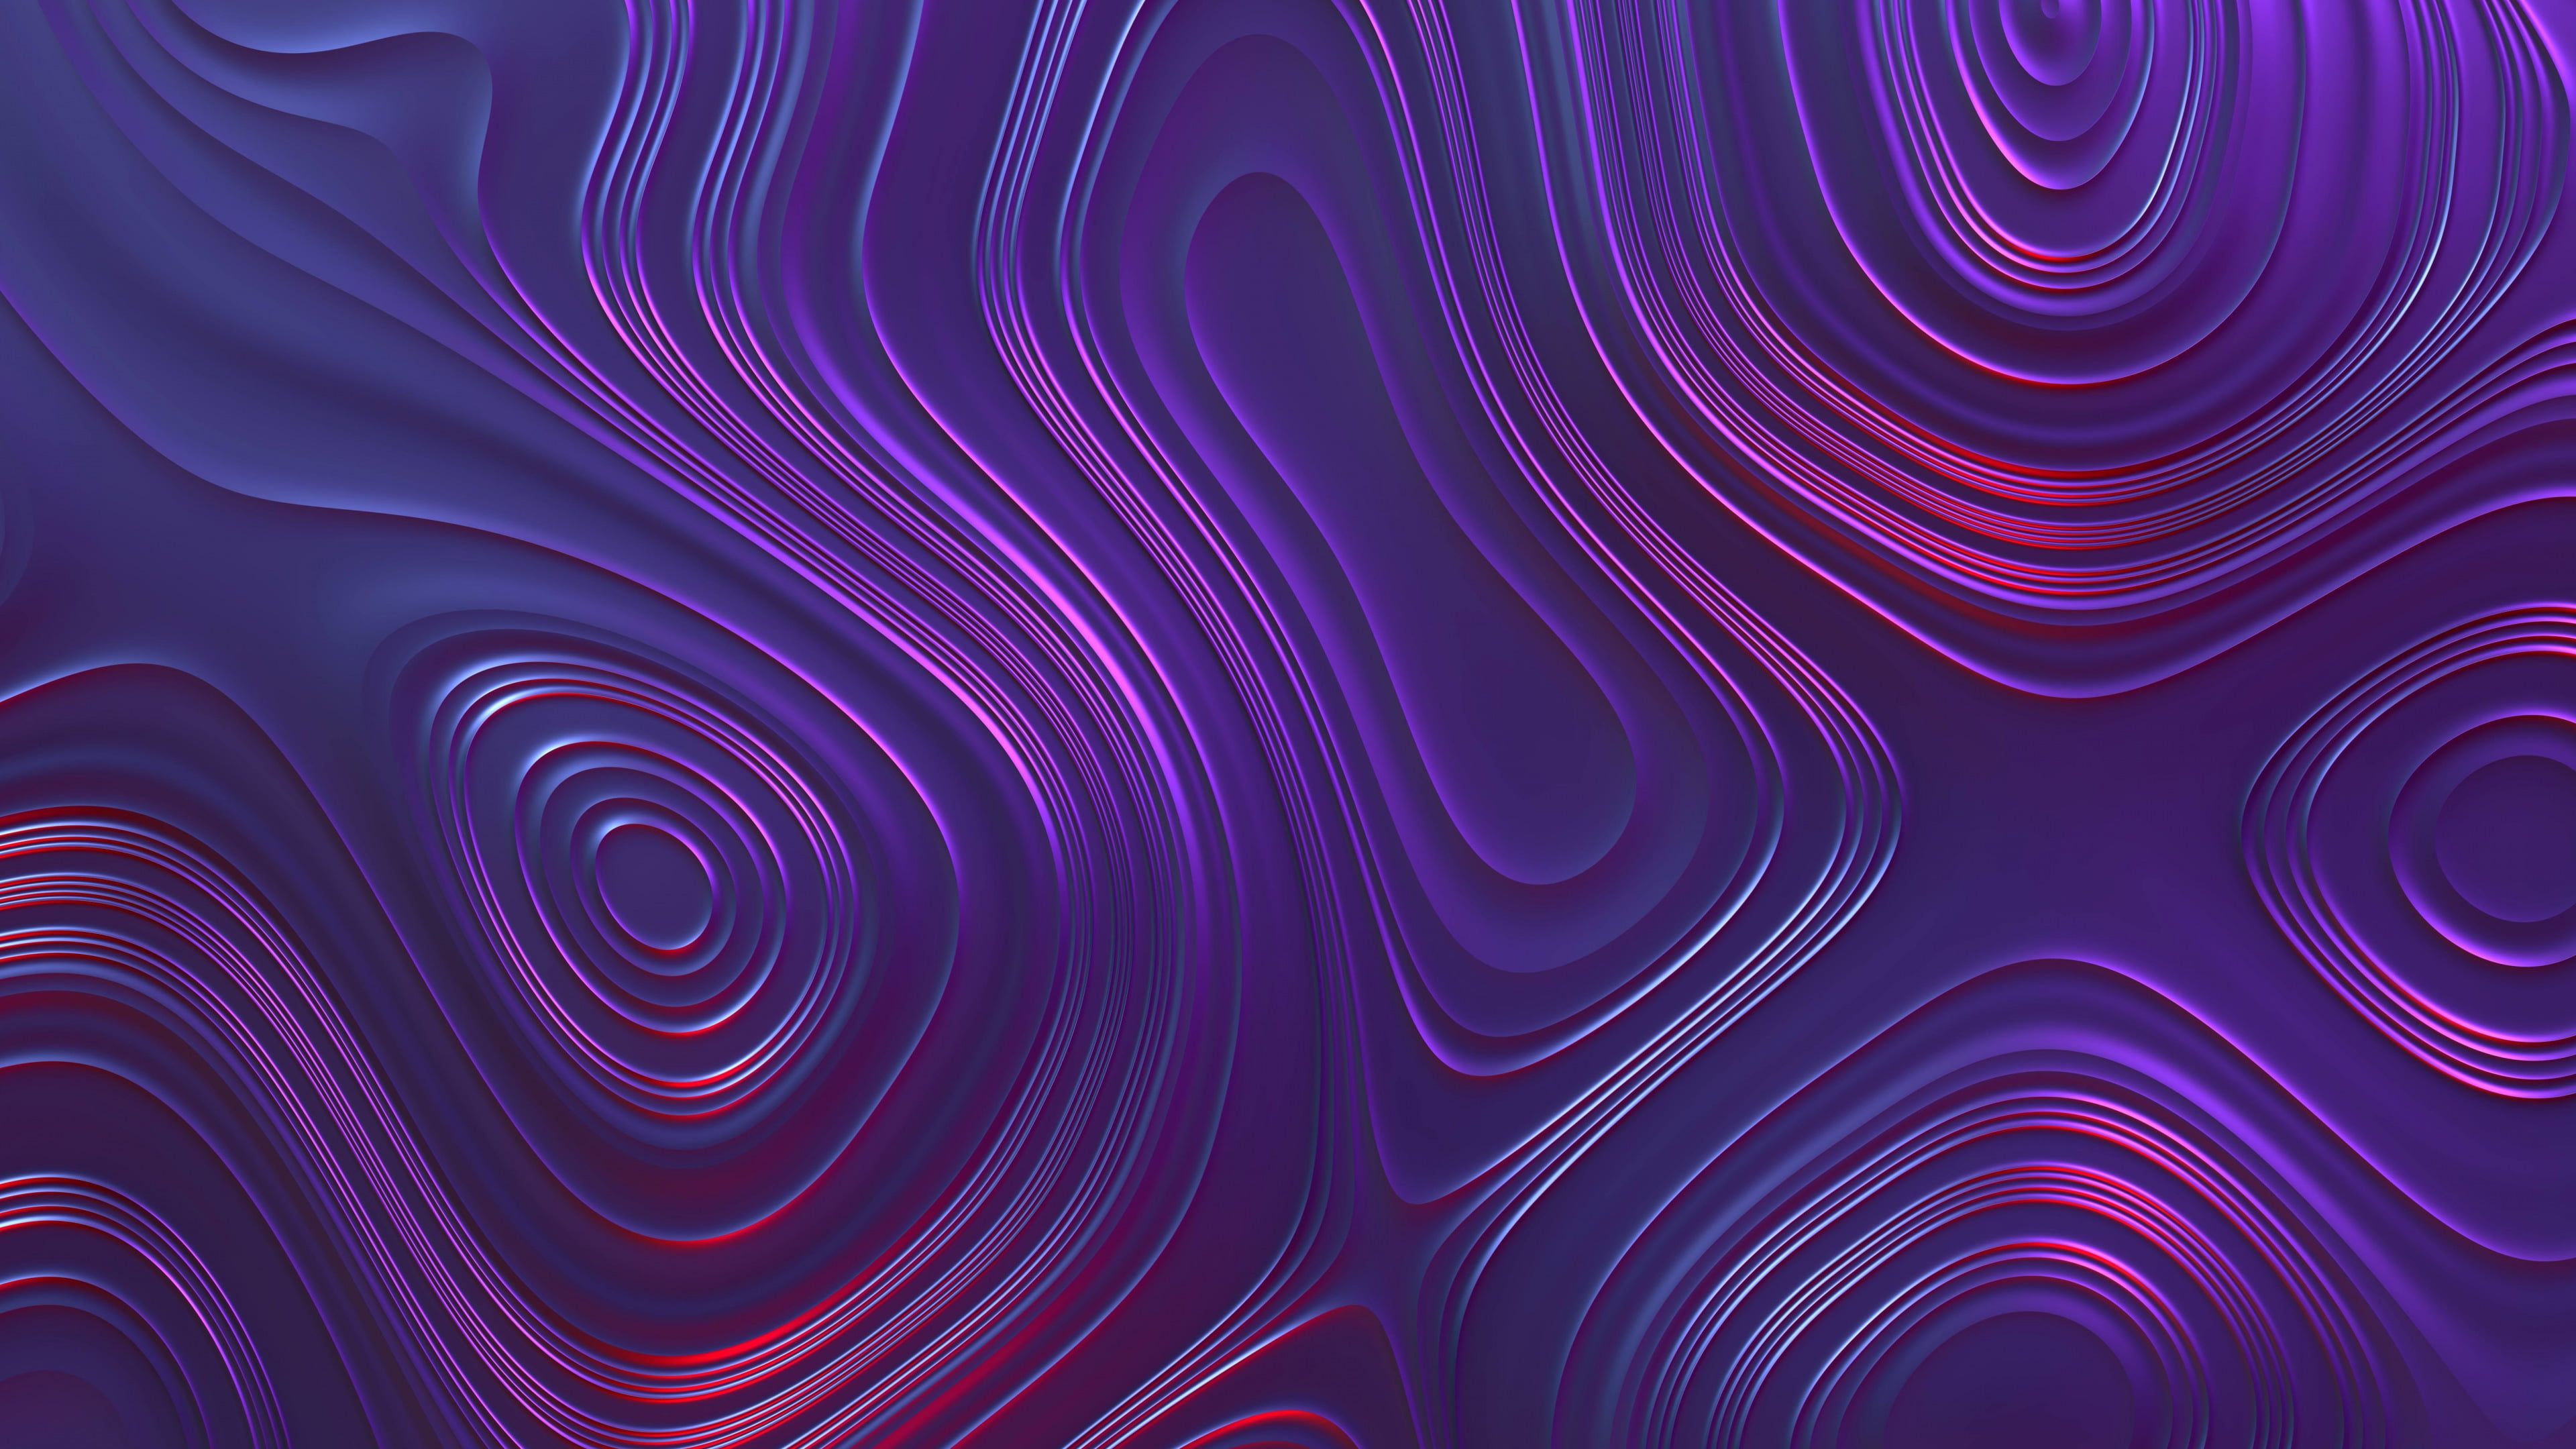 Purple and red abstract painting abstract wavy lines swirl swirls render shapes digital art k wallpapeâ red abstract painting abstract abstract painting